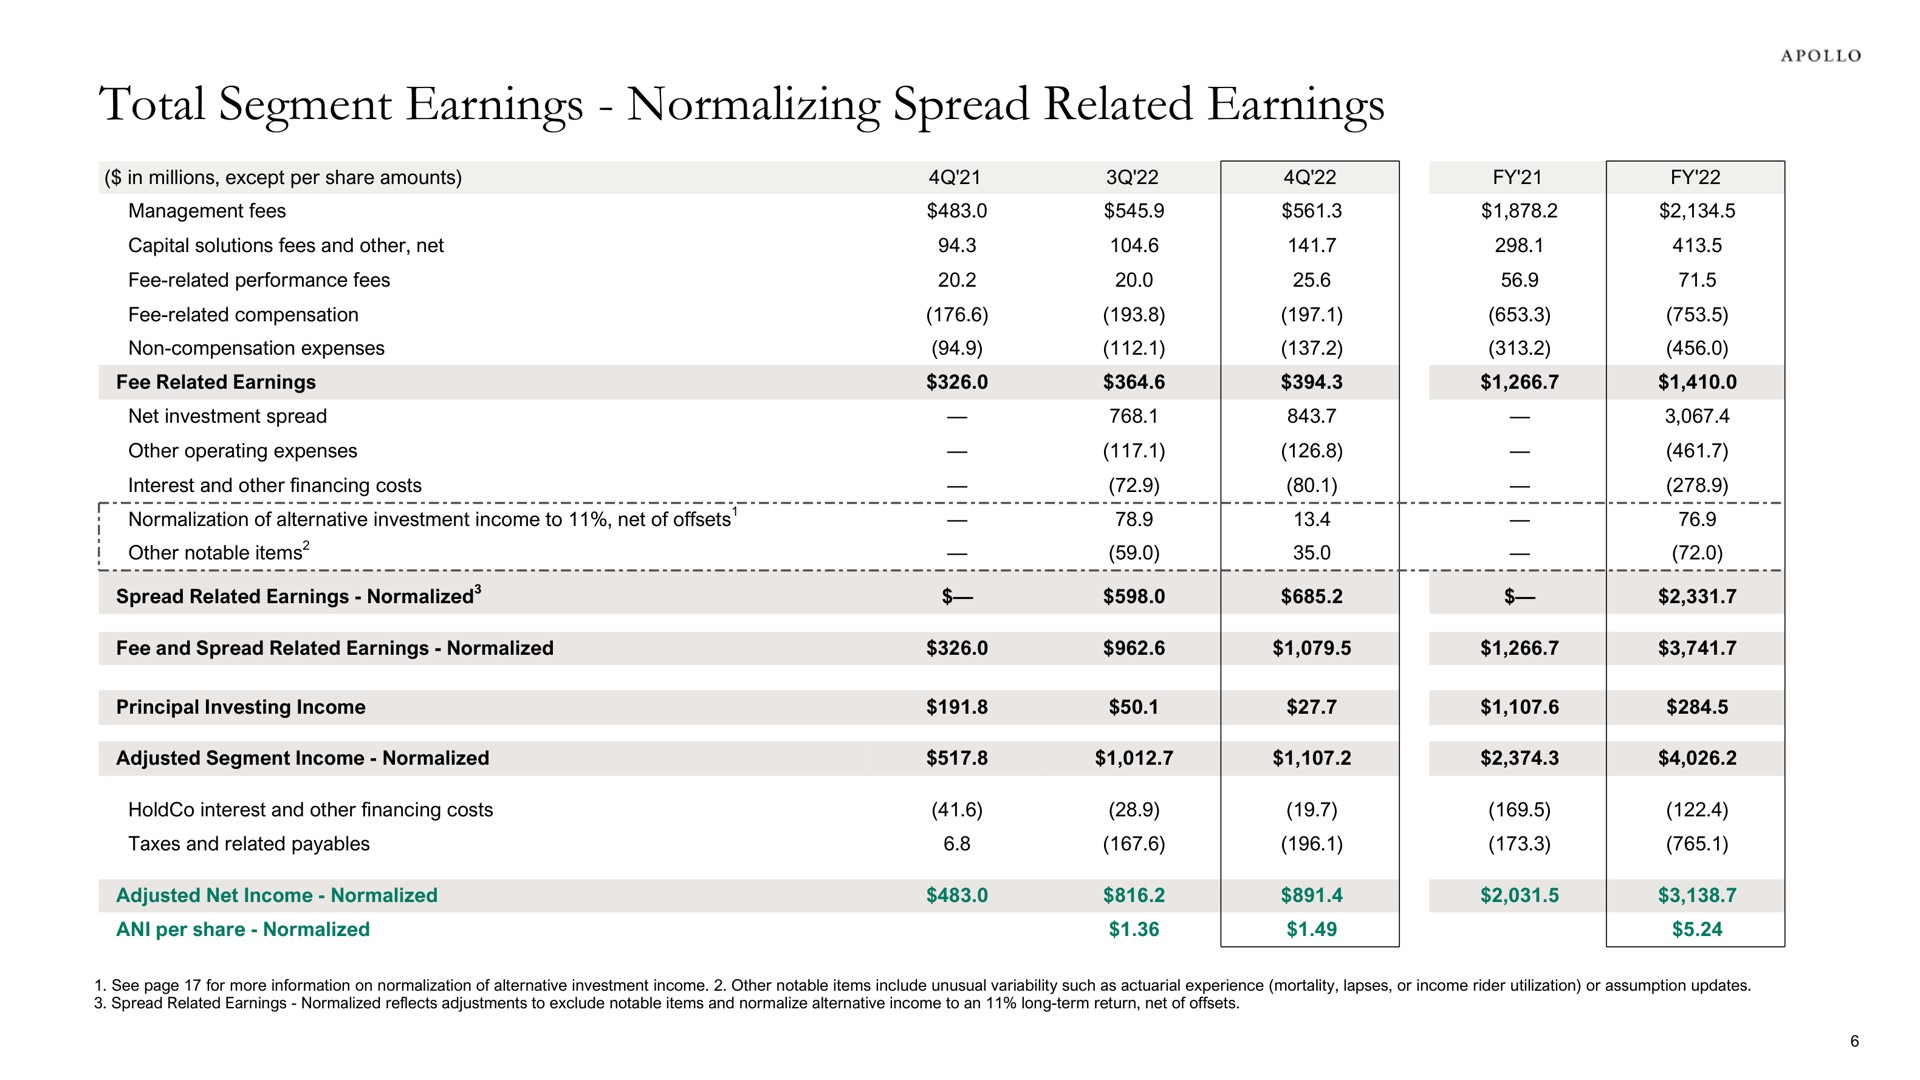 total segment earnings normalizing spread related earnings | Apollo Global Management